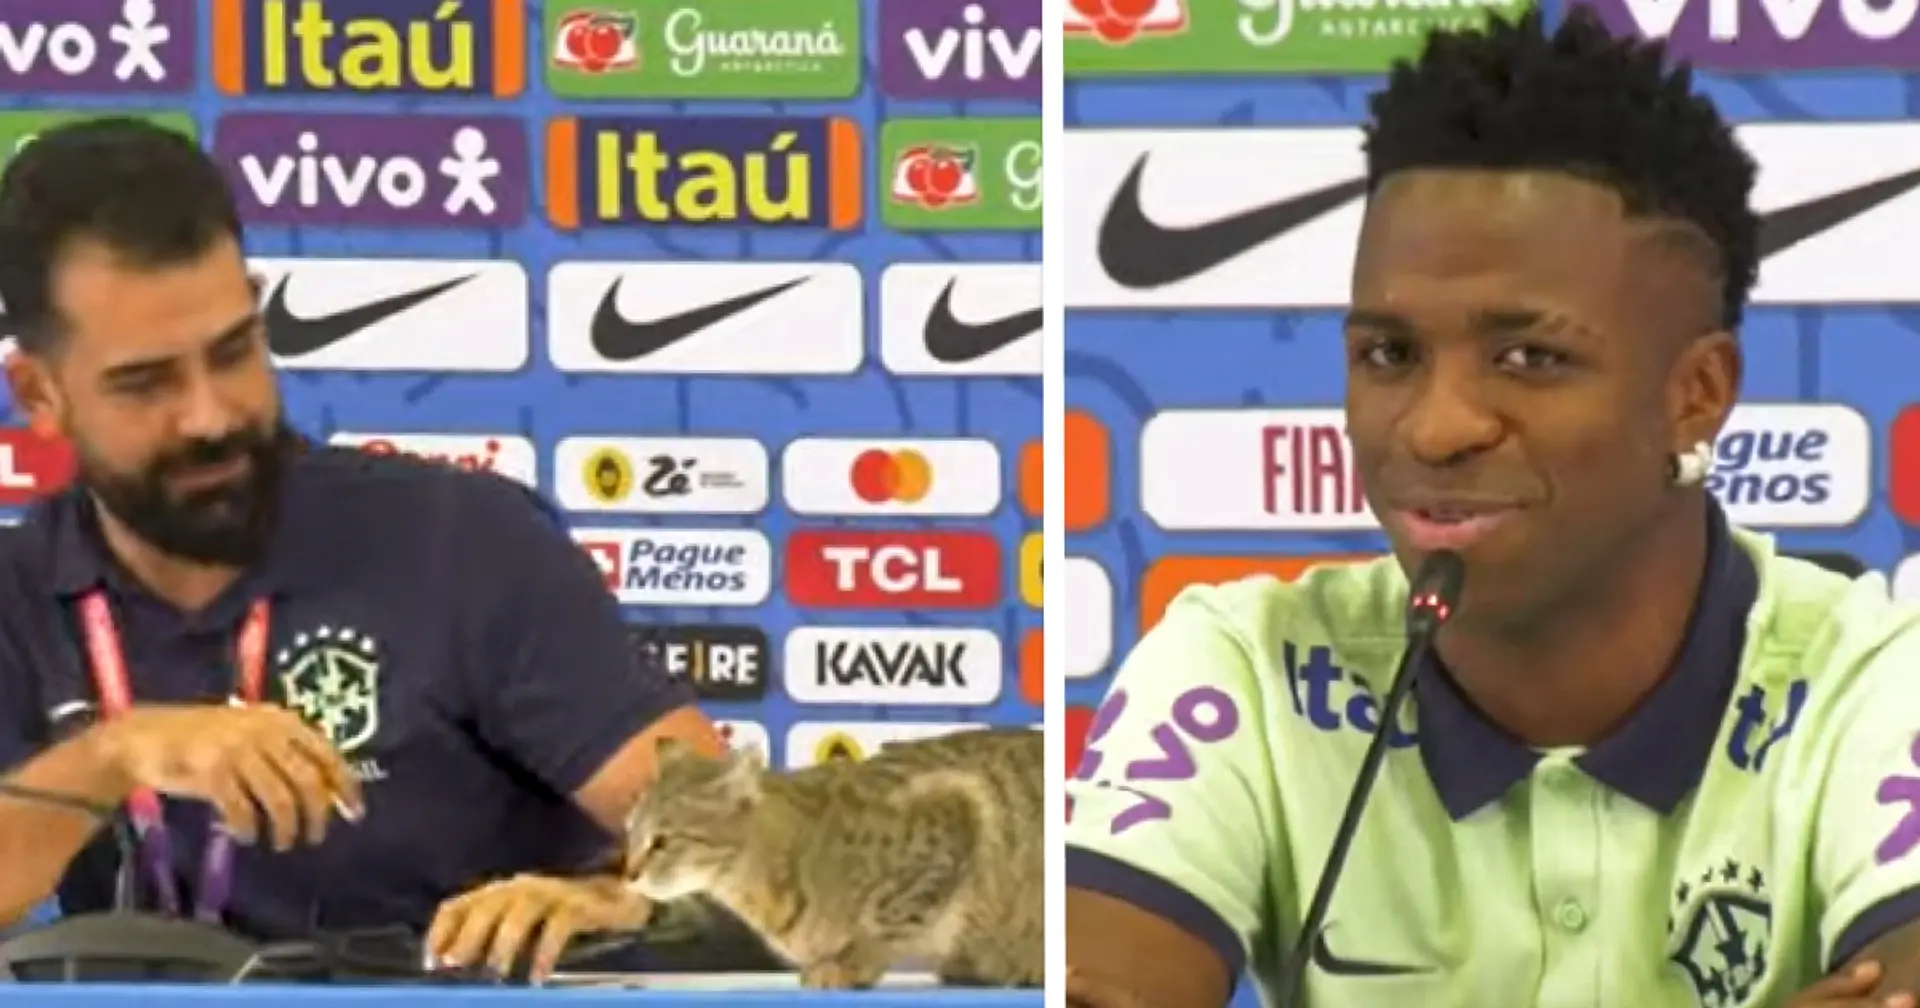 Cat interrupts Vinicus' press conference, Vini reaction as animal is removed spotted